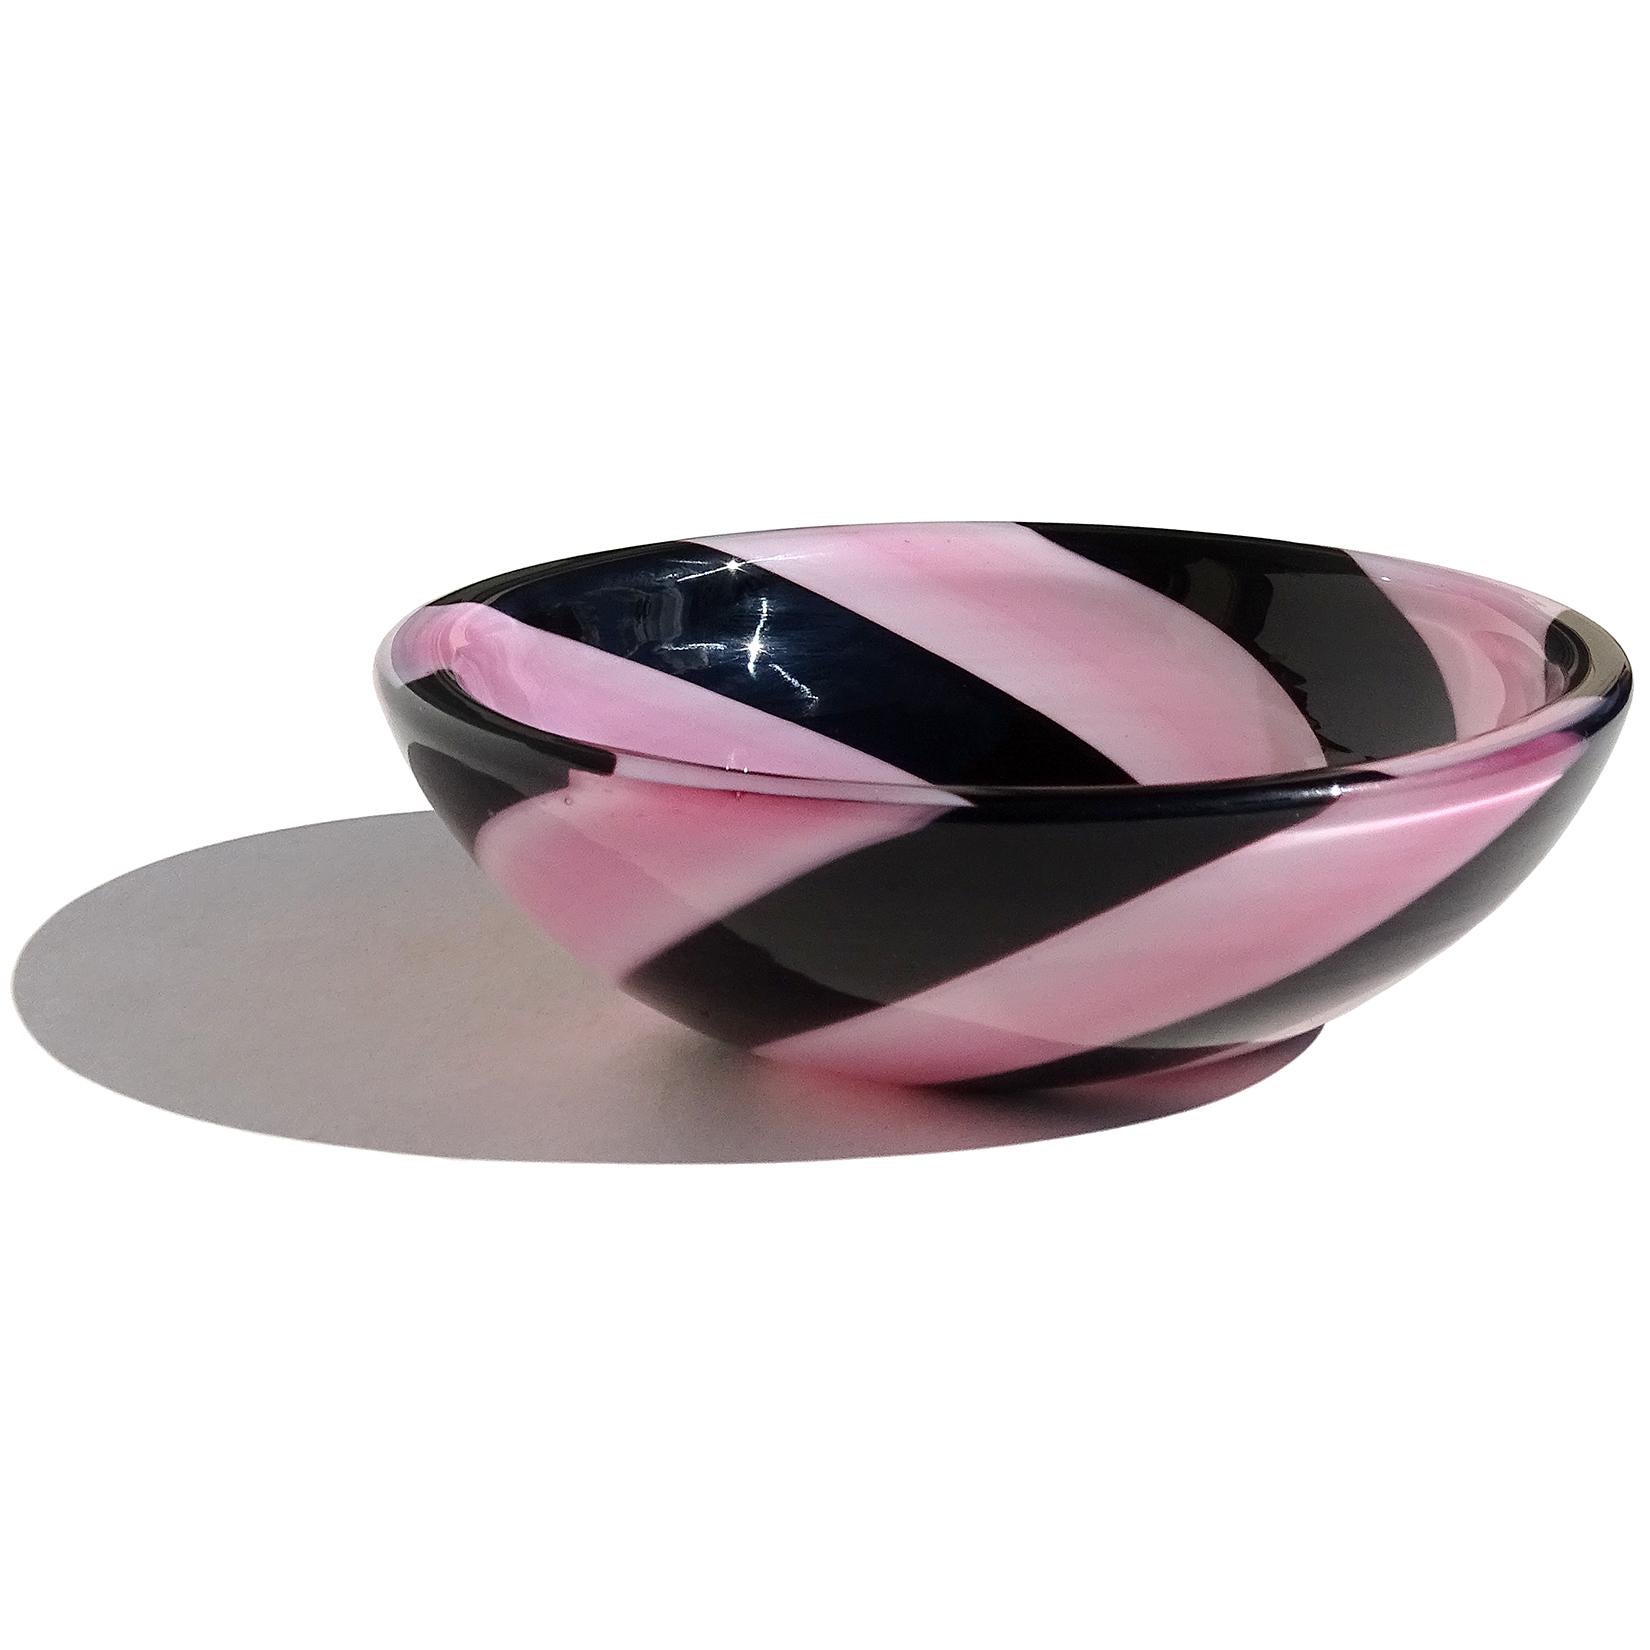 Gorgeous vintage Murano hand blown pink and black optic swirl Italian art glass bowl or dish. Has been documented to designer Fulvio Bianconi, for the Venini company. Described as 